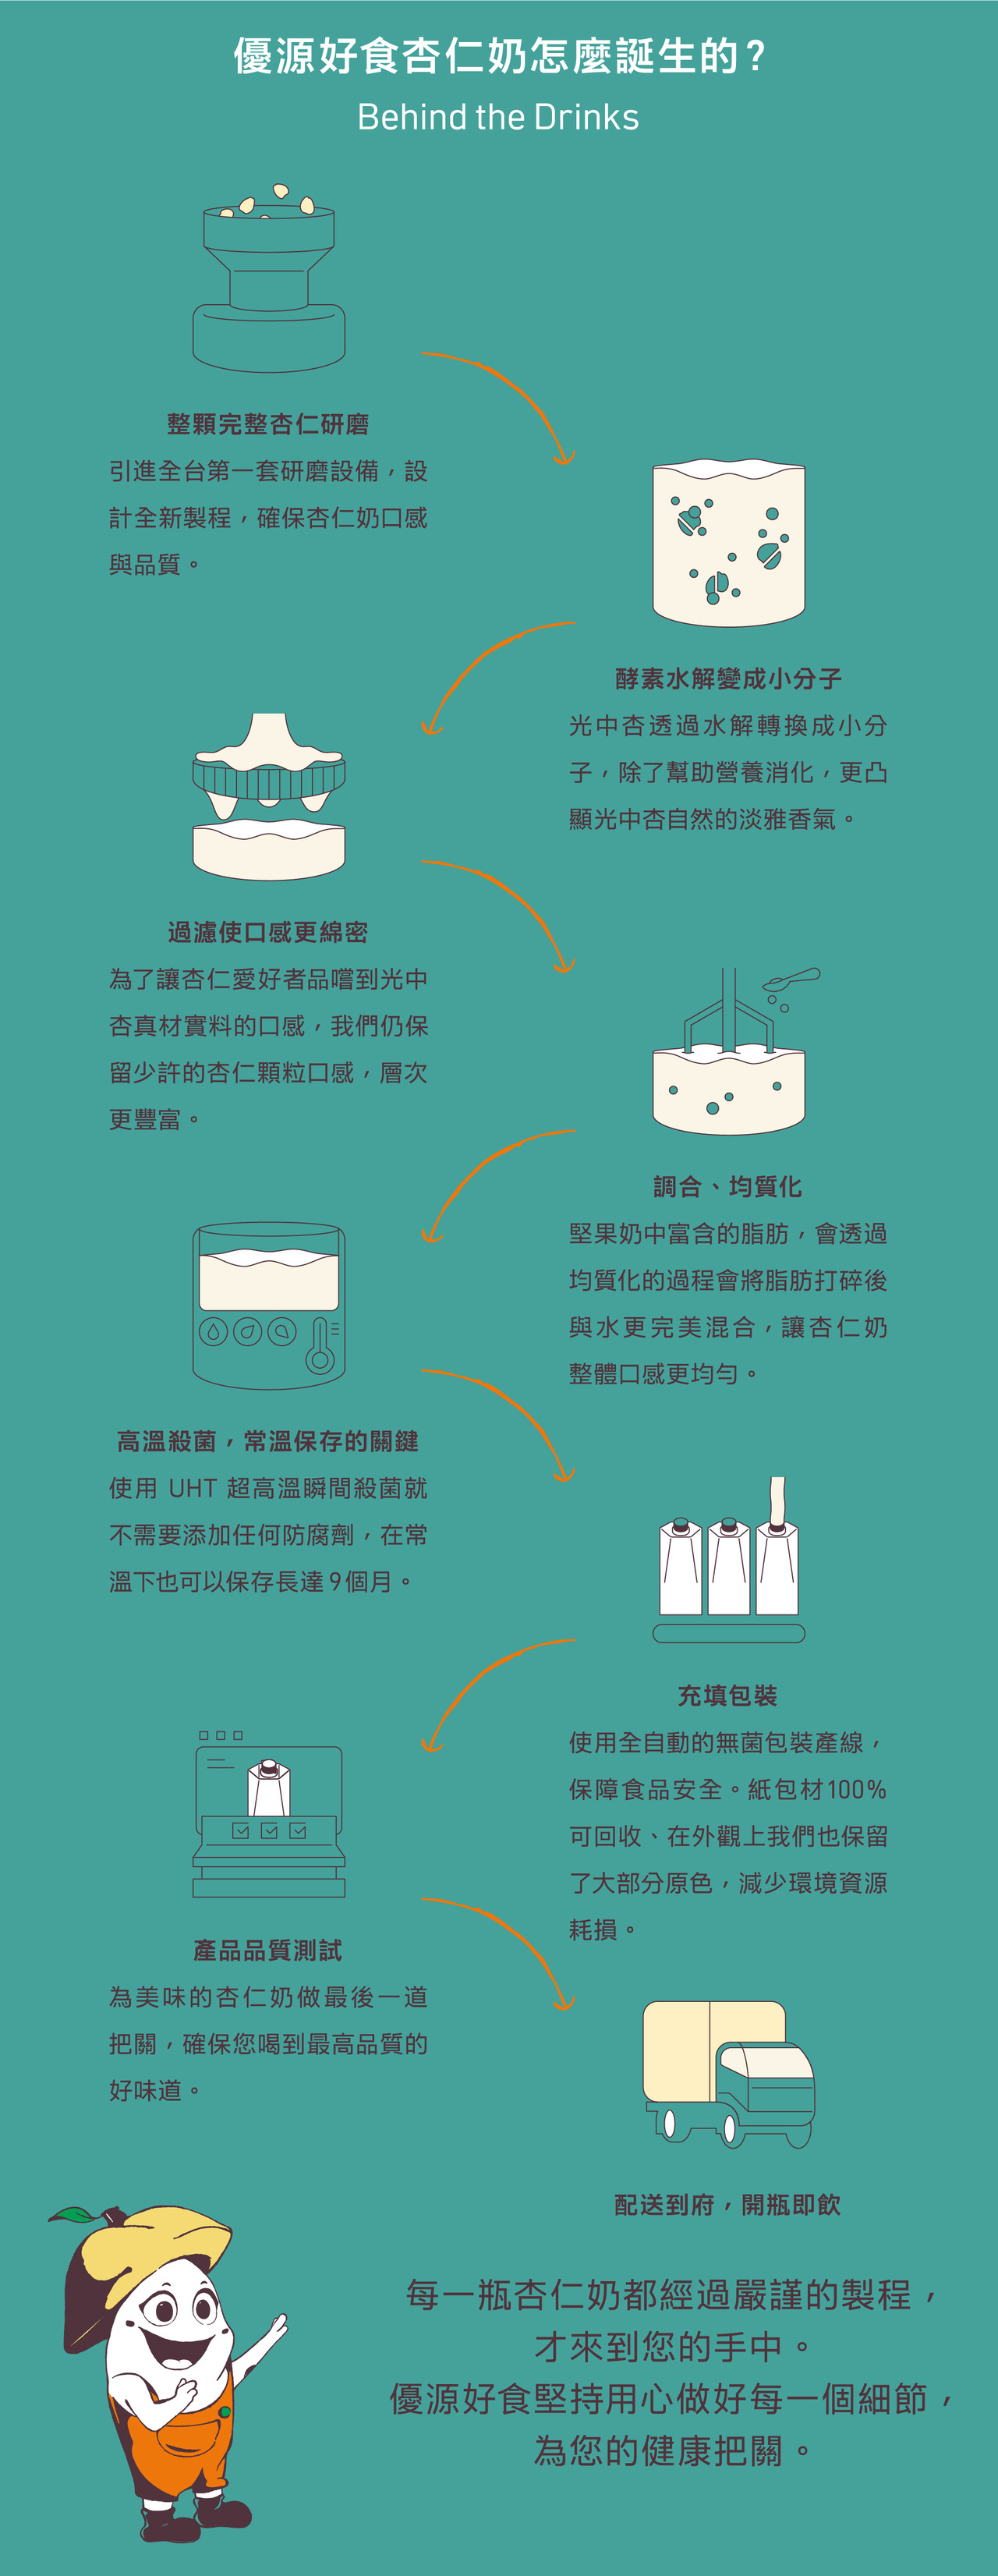 Youyuan Good Food almond milk raw materials and production methods